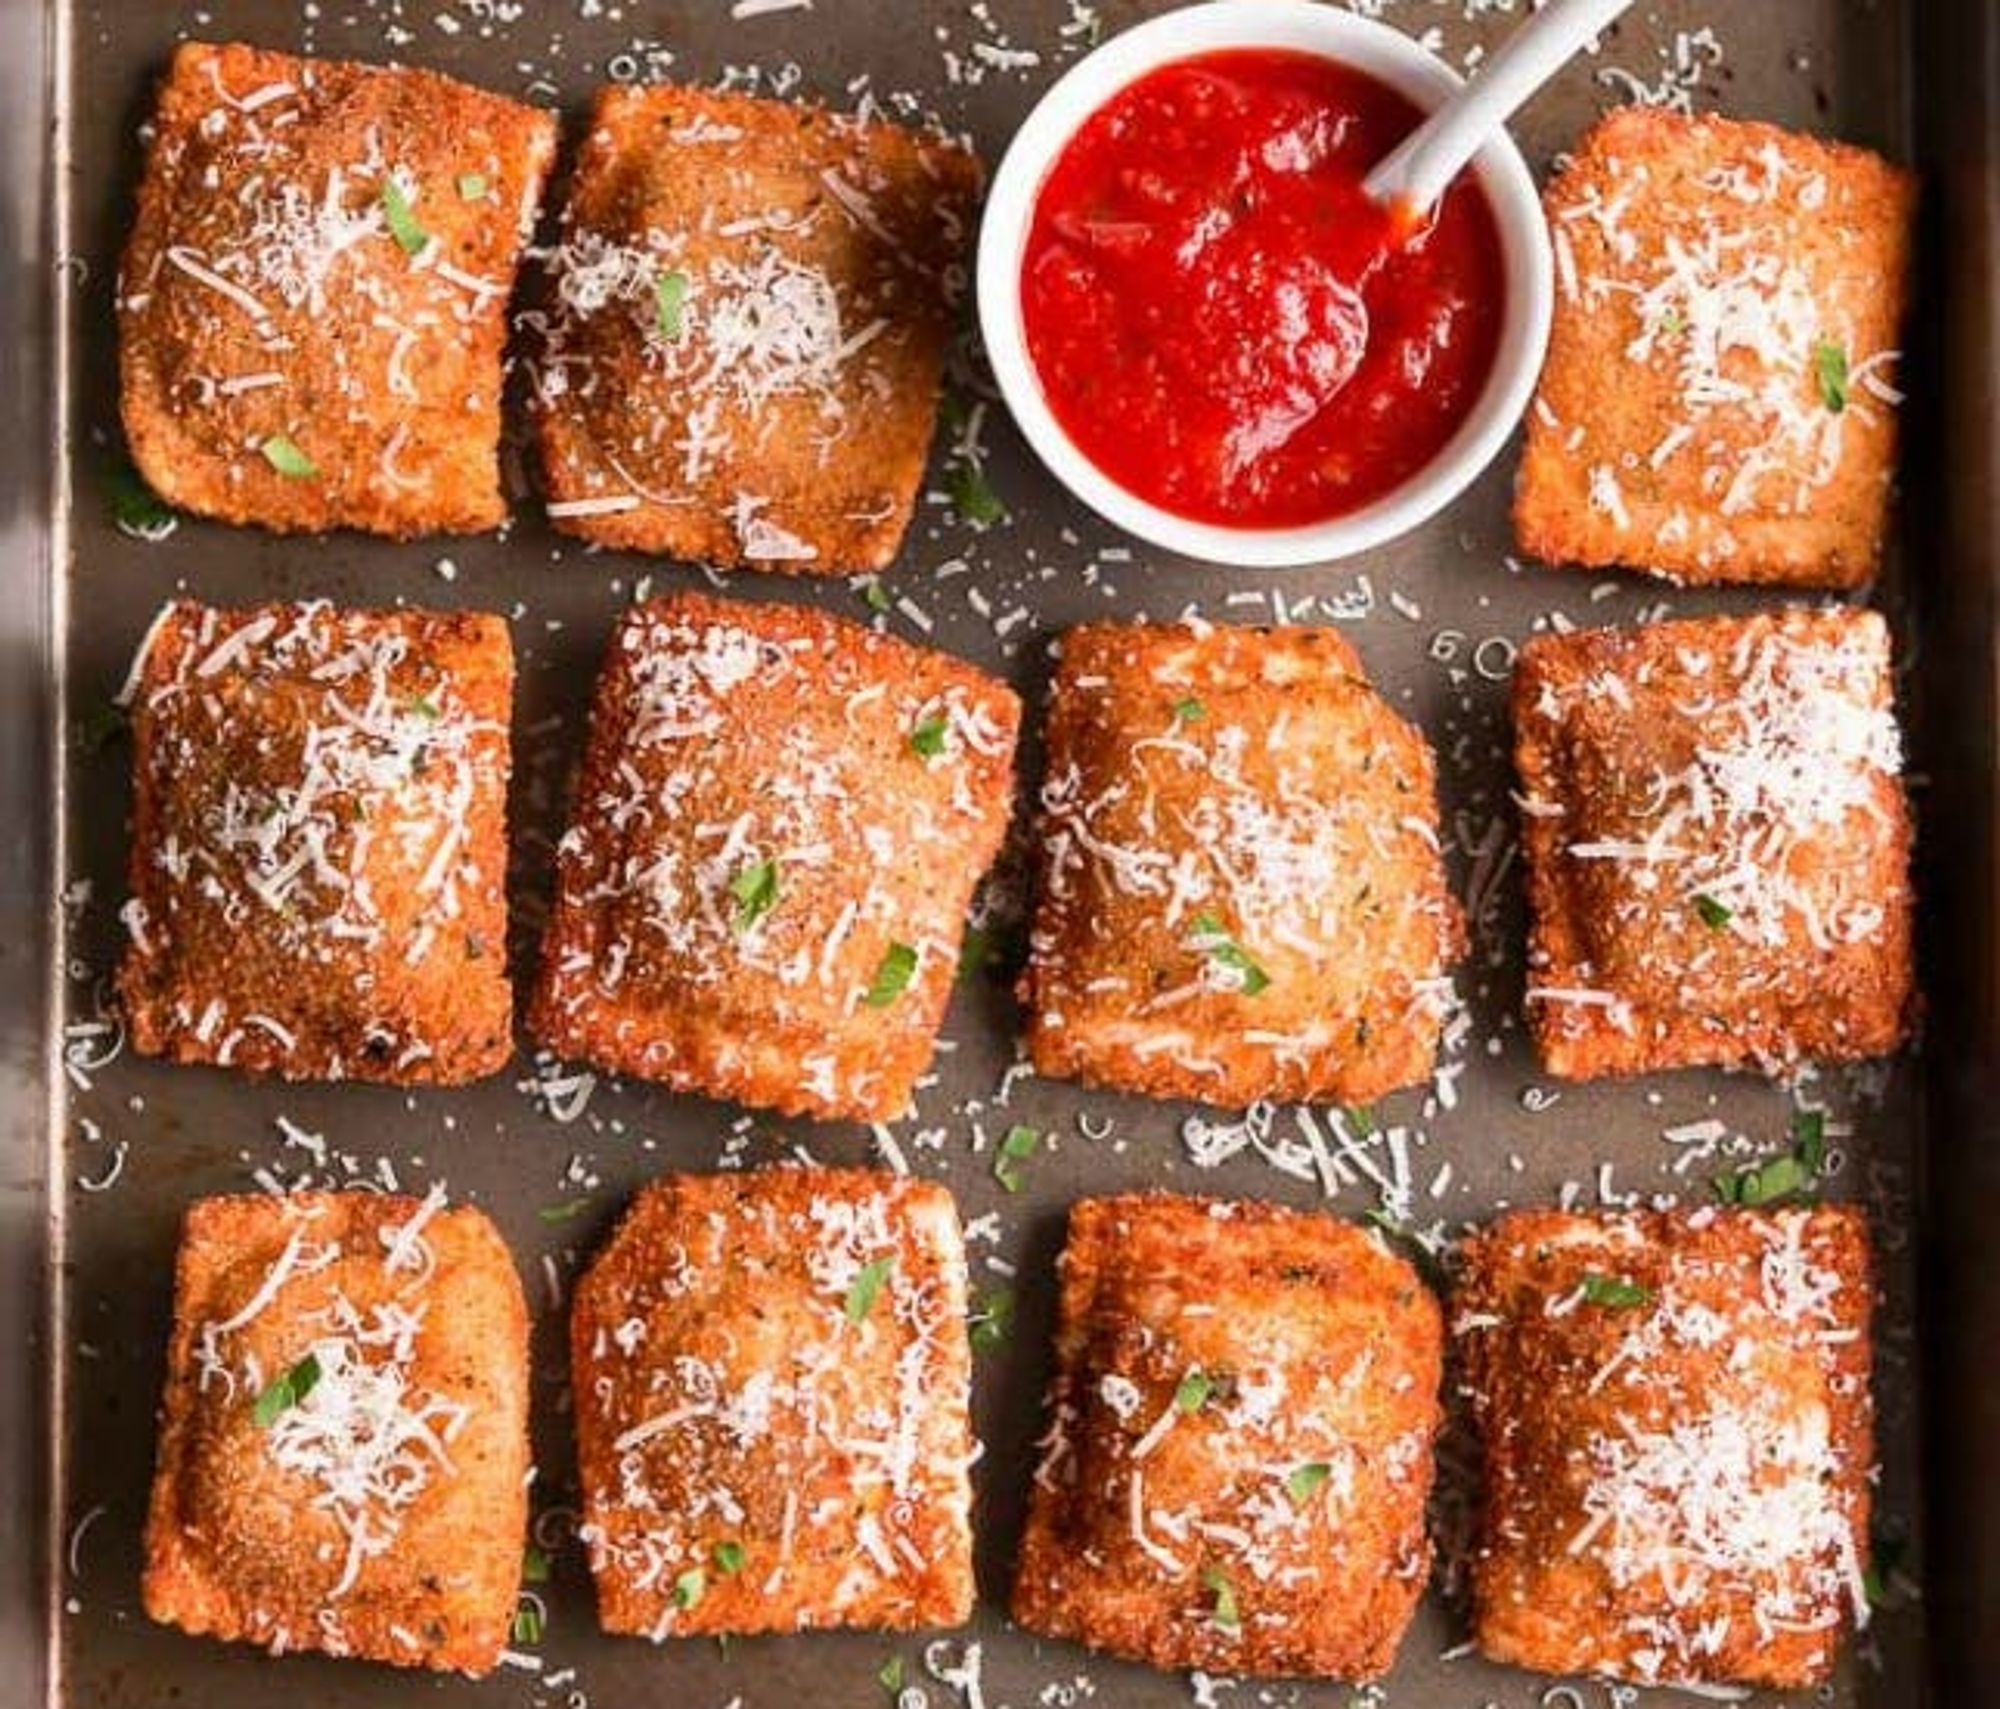 https://www.brit.co/media-library/toasted-ravioli-christmas-party-recipes.jpg?id=20885867&width=2000&height=1500&coordinates=0%2C208%2C0%2C209